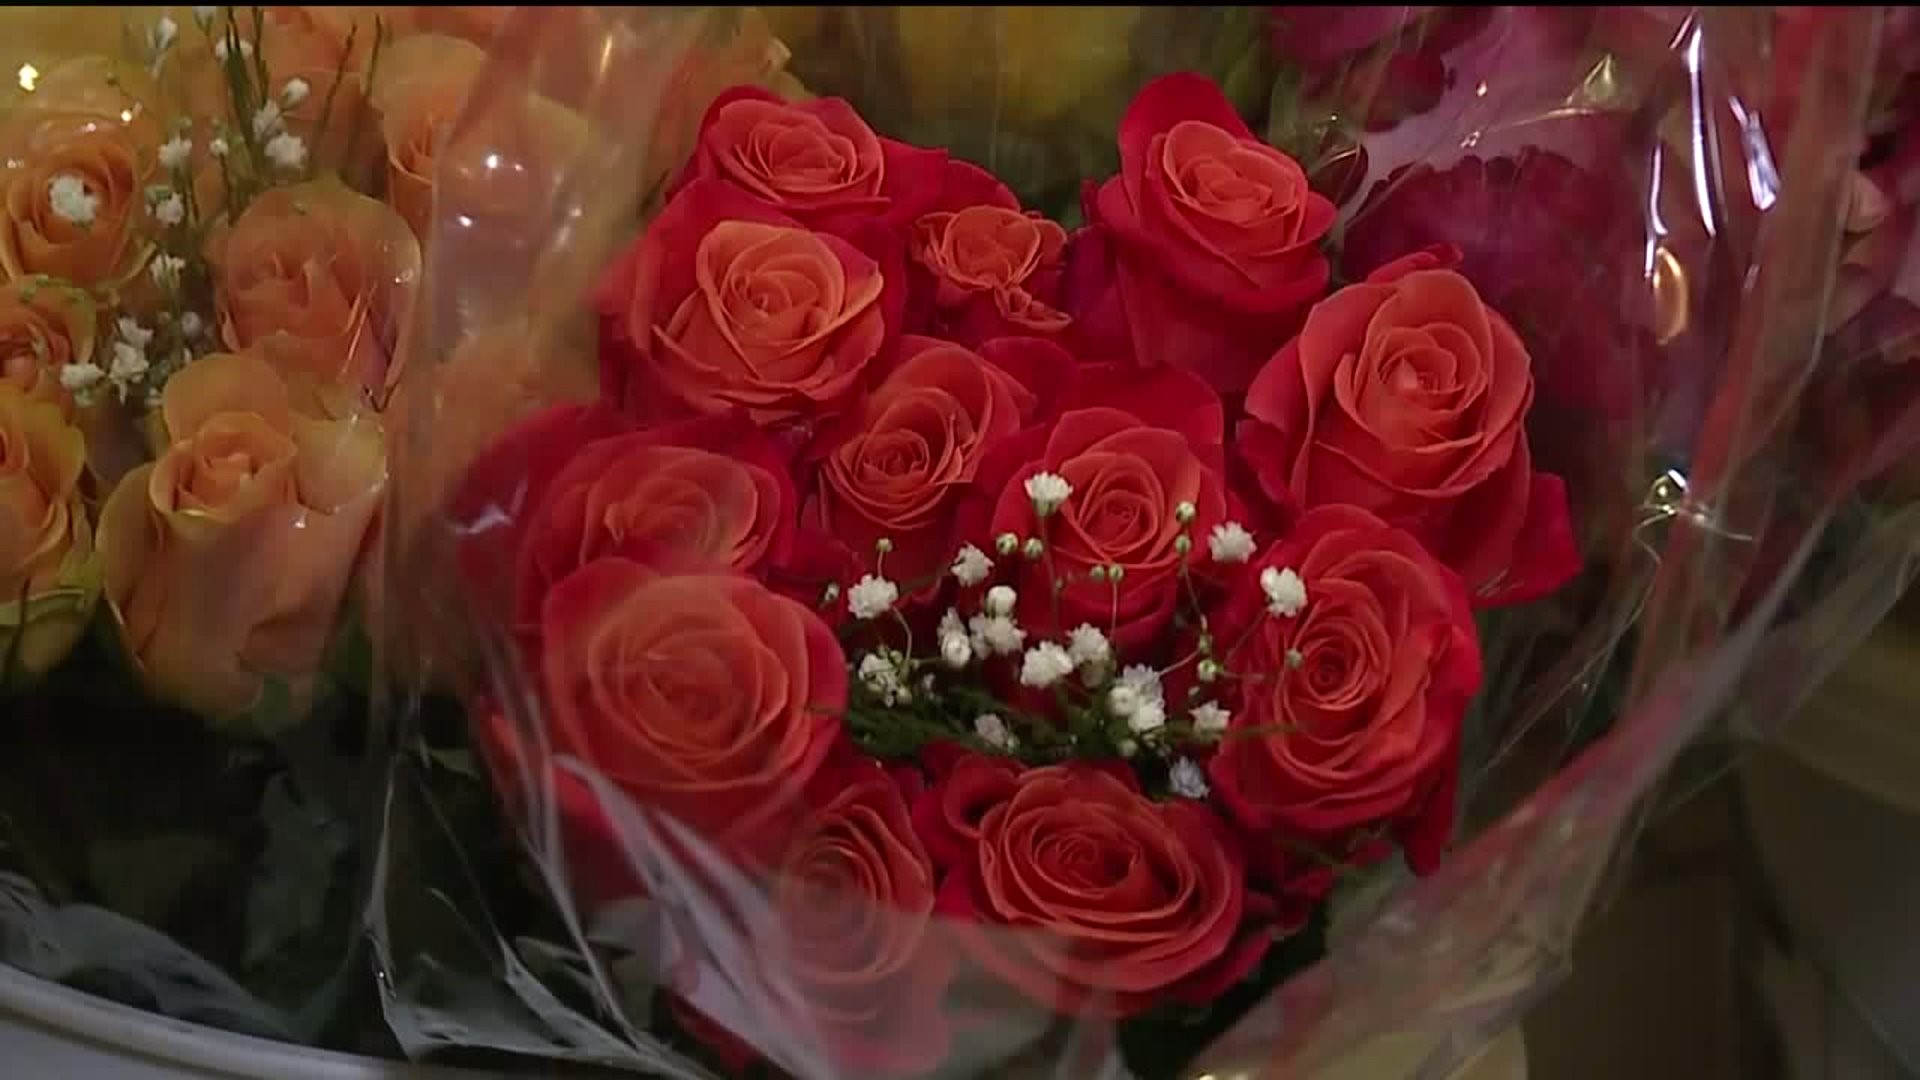 Fire Department Selling Valentine's Day Roses in South Williamsport